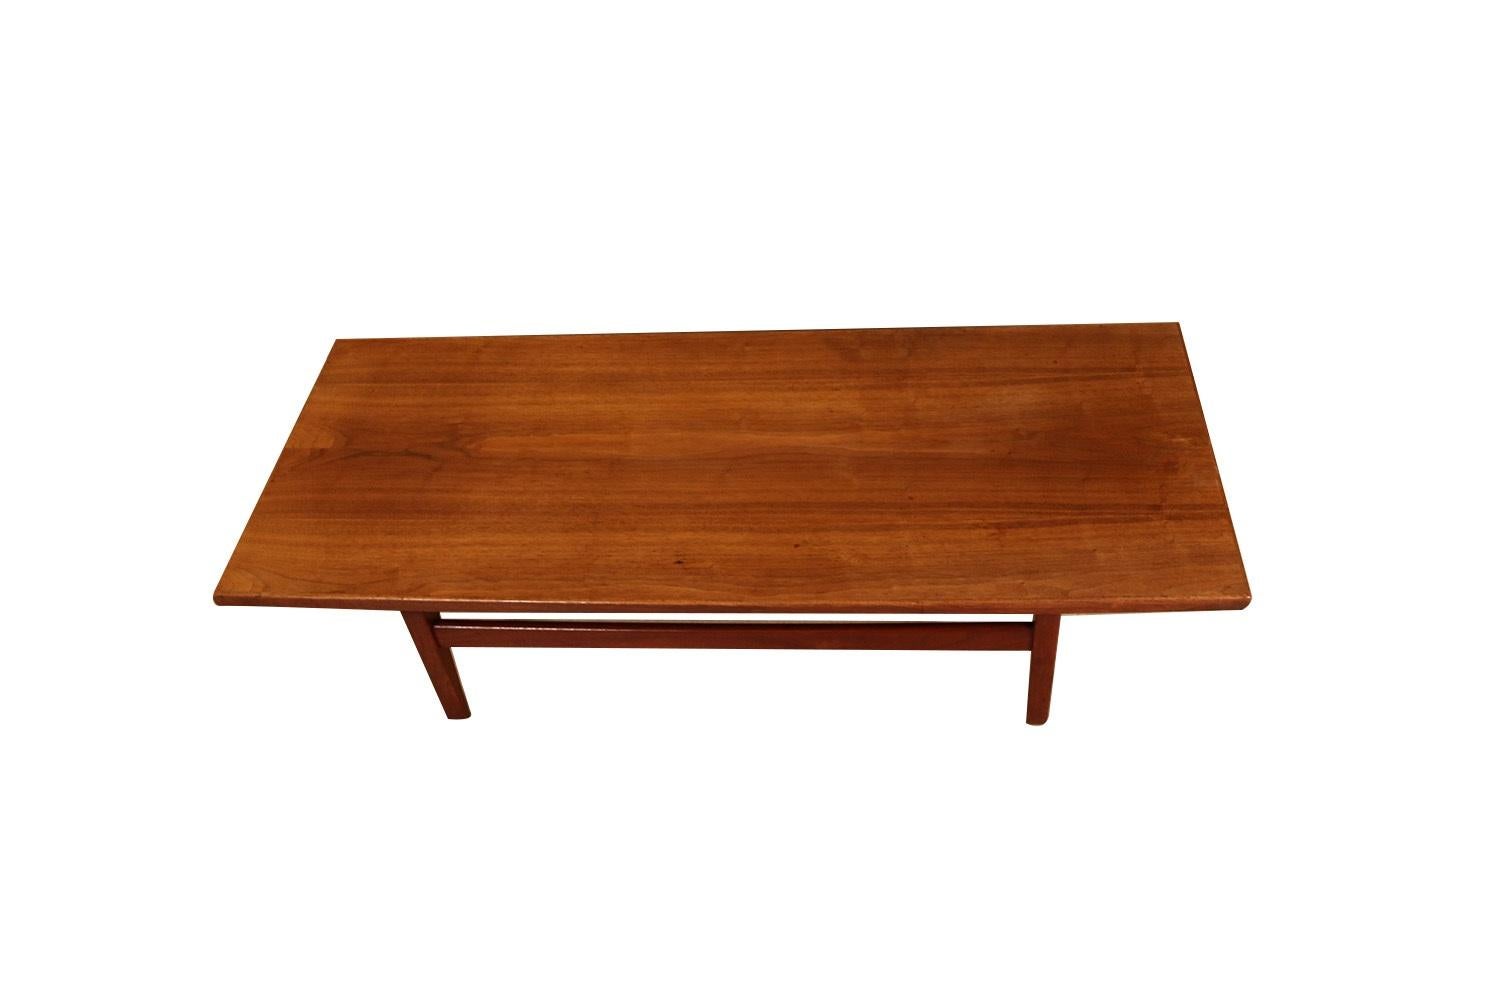 Vintage midcentury 1960s modern walnut coffee table, long bench by Jens Risom. This beautiful Jens Risom table features walnut top gracefully suspended above tapered and flared legs. The rich warm walnut patina has warmed and mellowed creating a